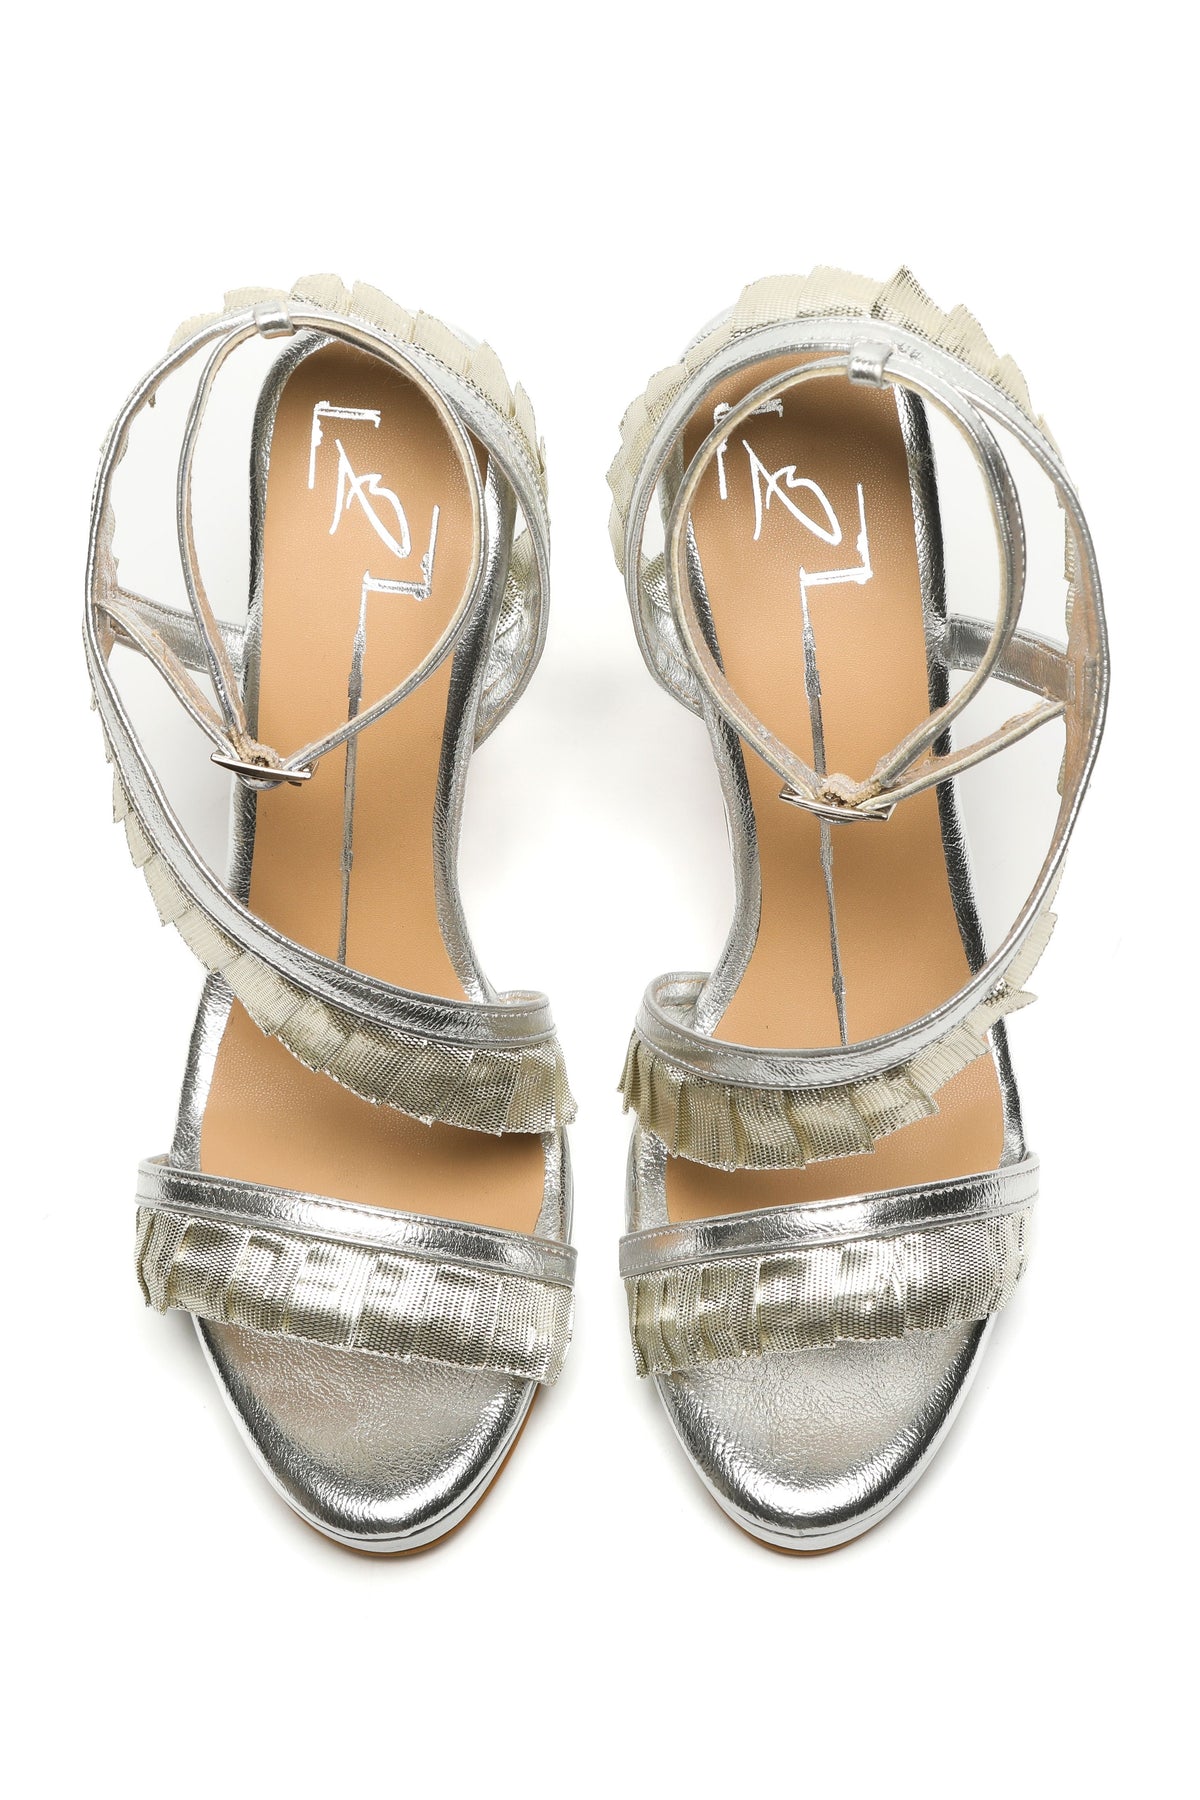 Frilled Silver Strappy Heels